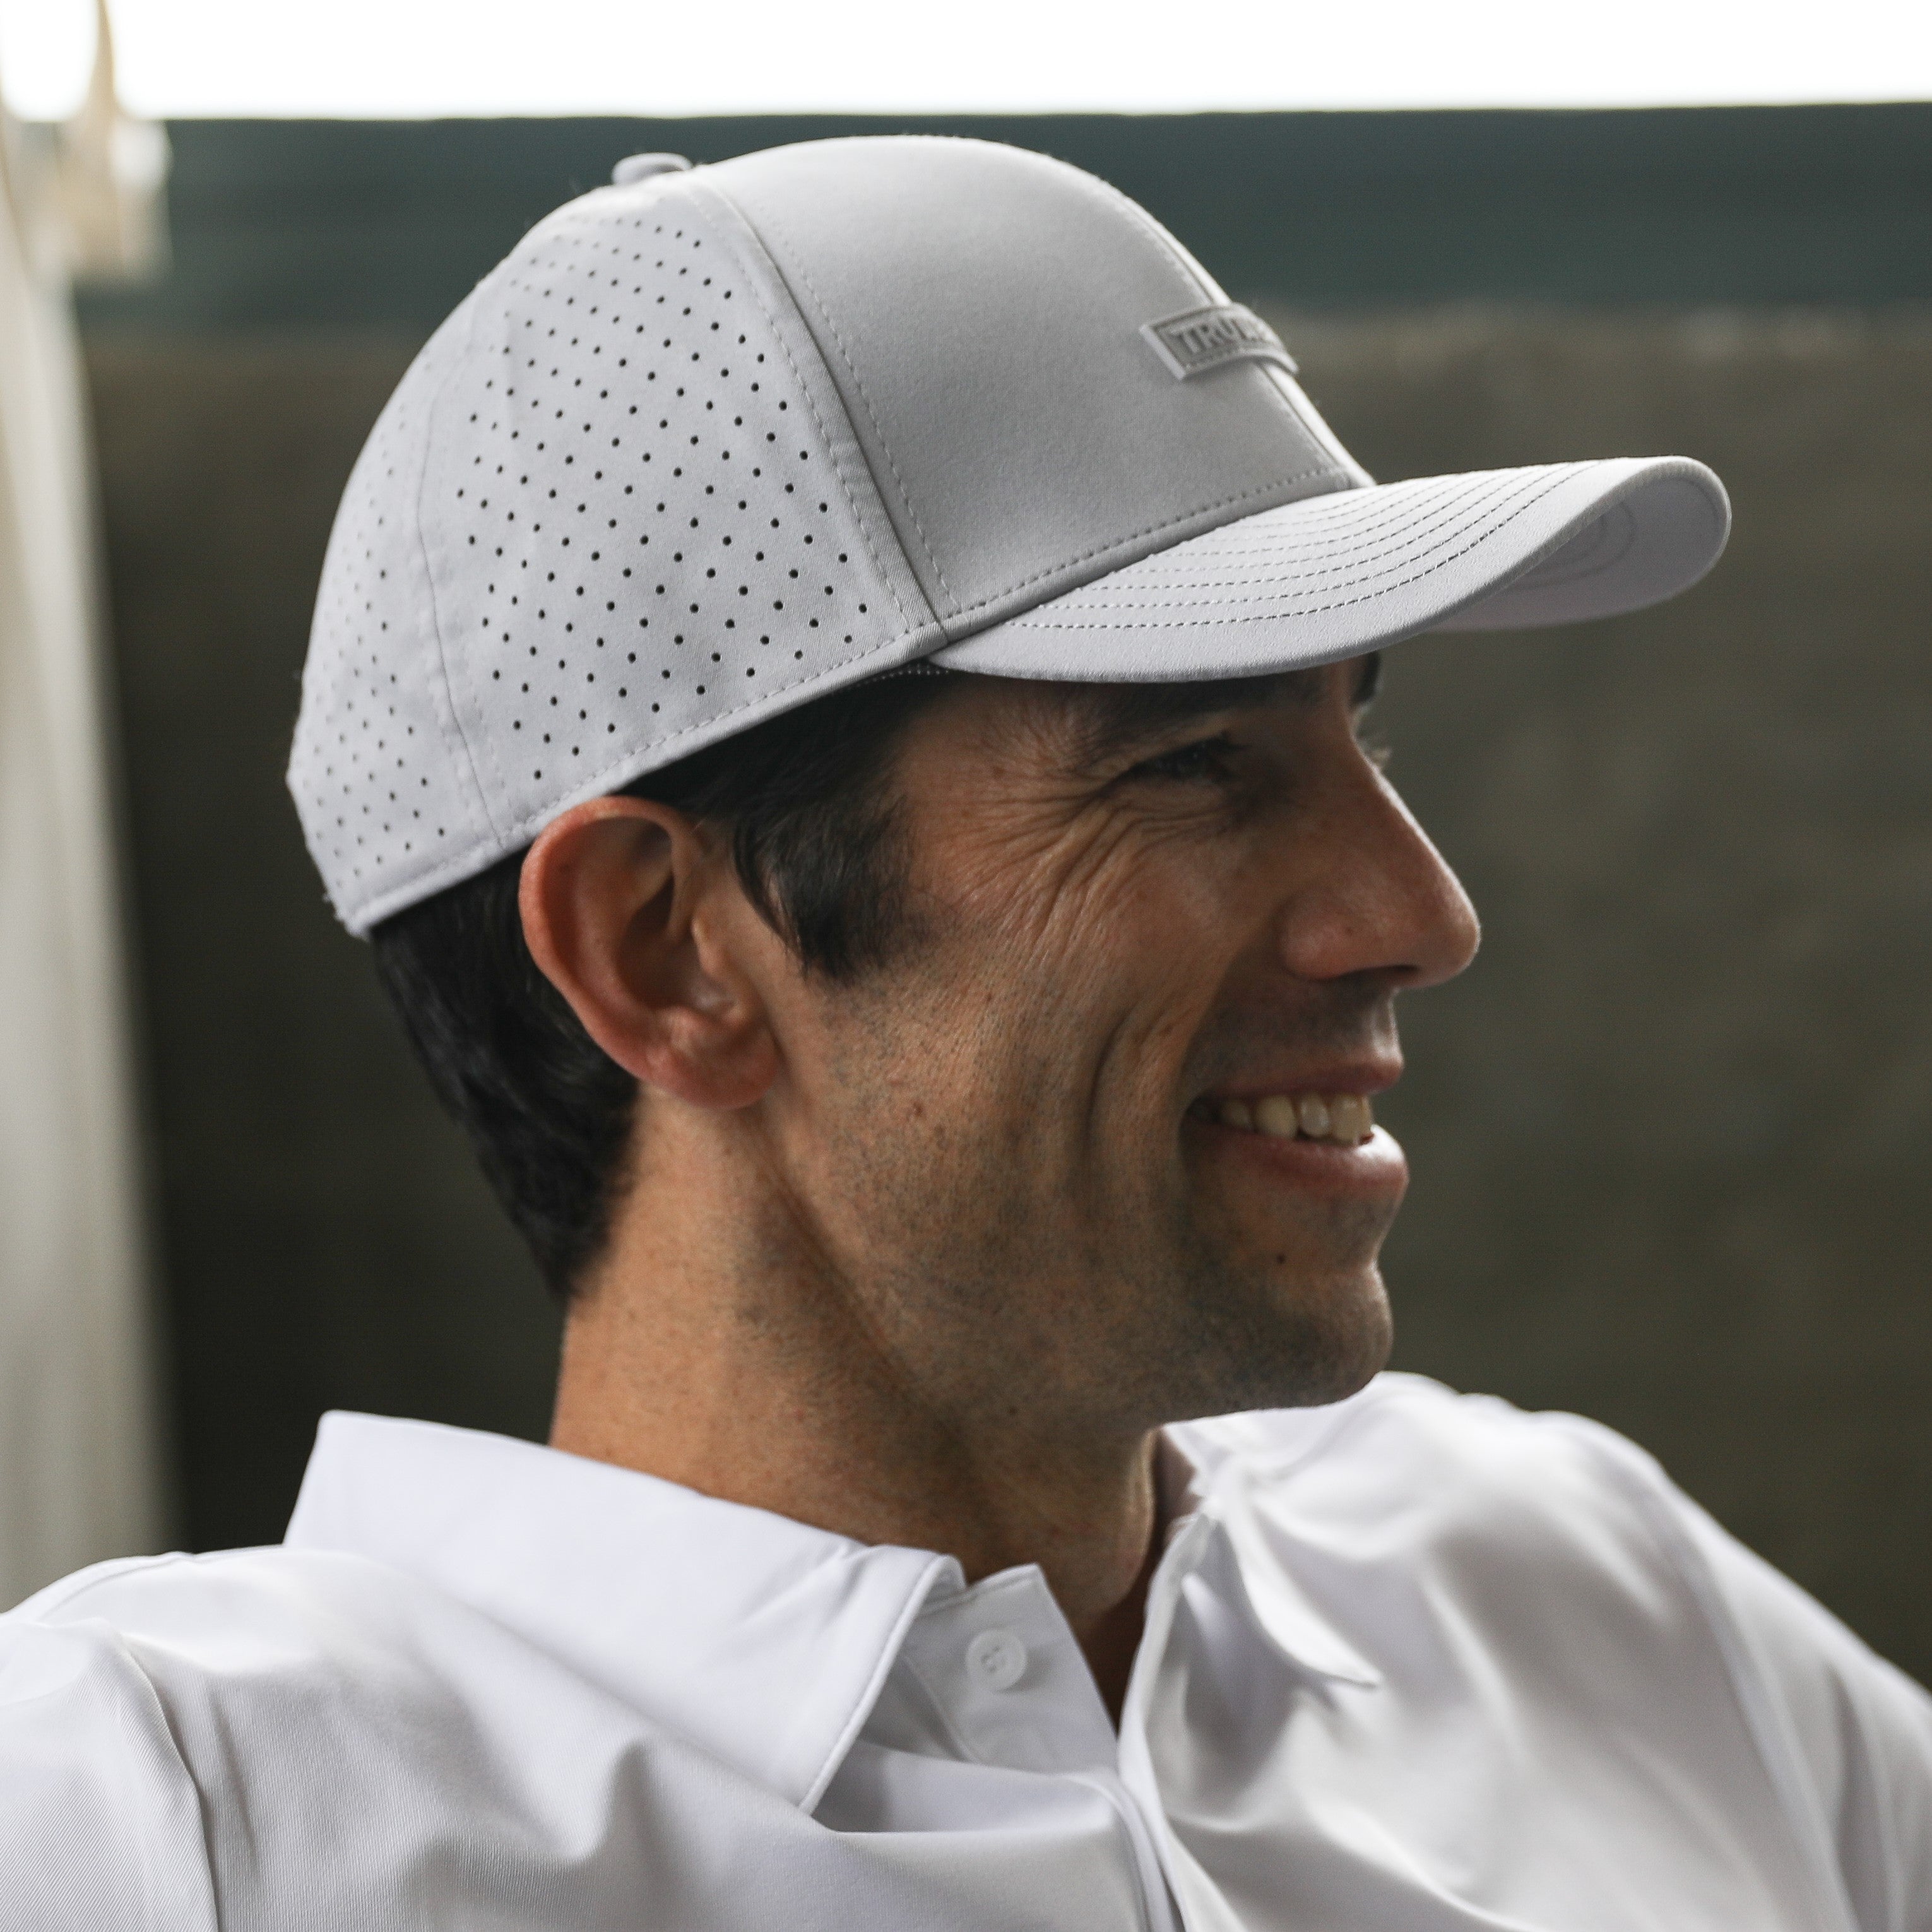 The Perfect Fit: Discovering Truwear's Signature Hat Styles